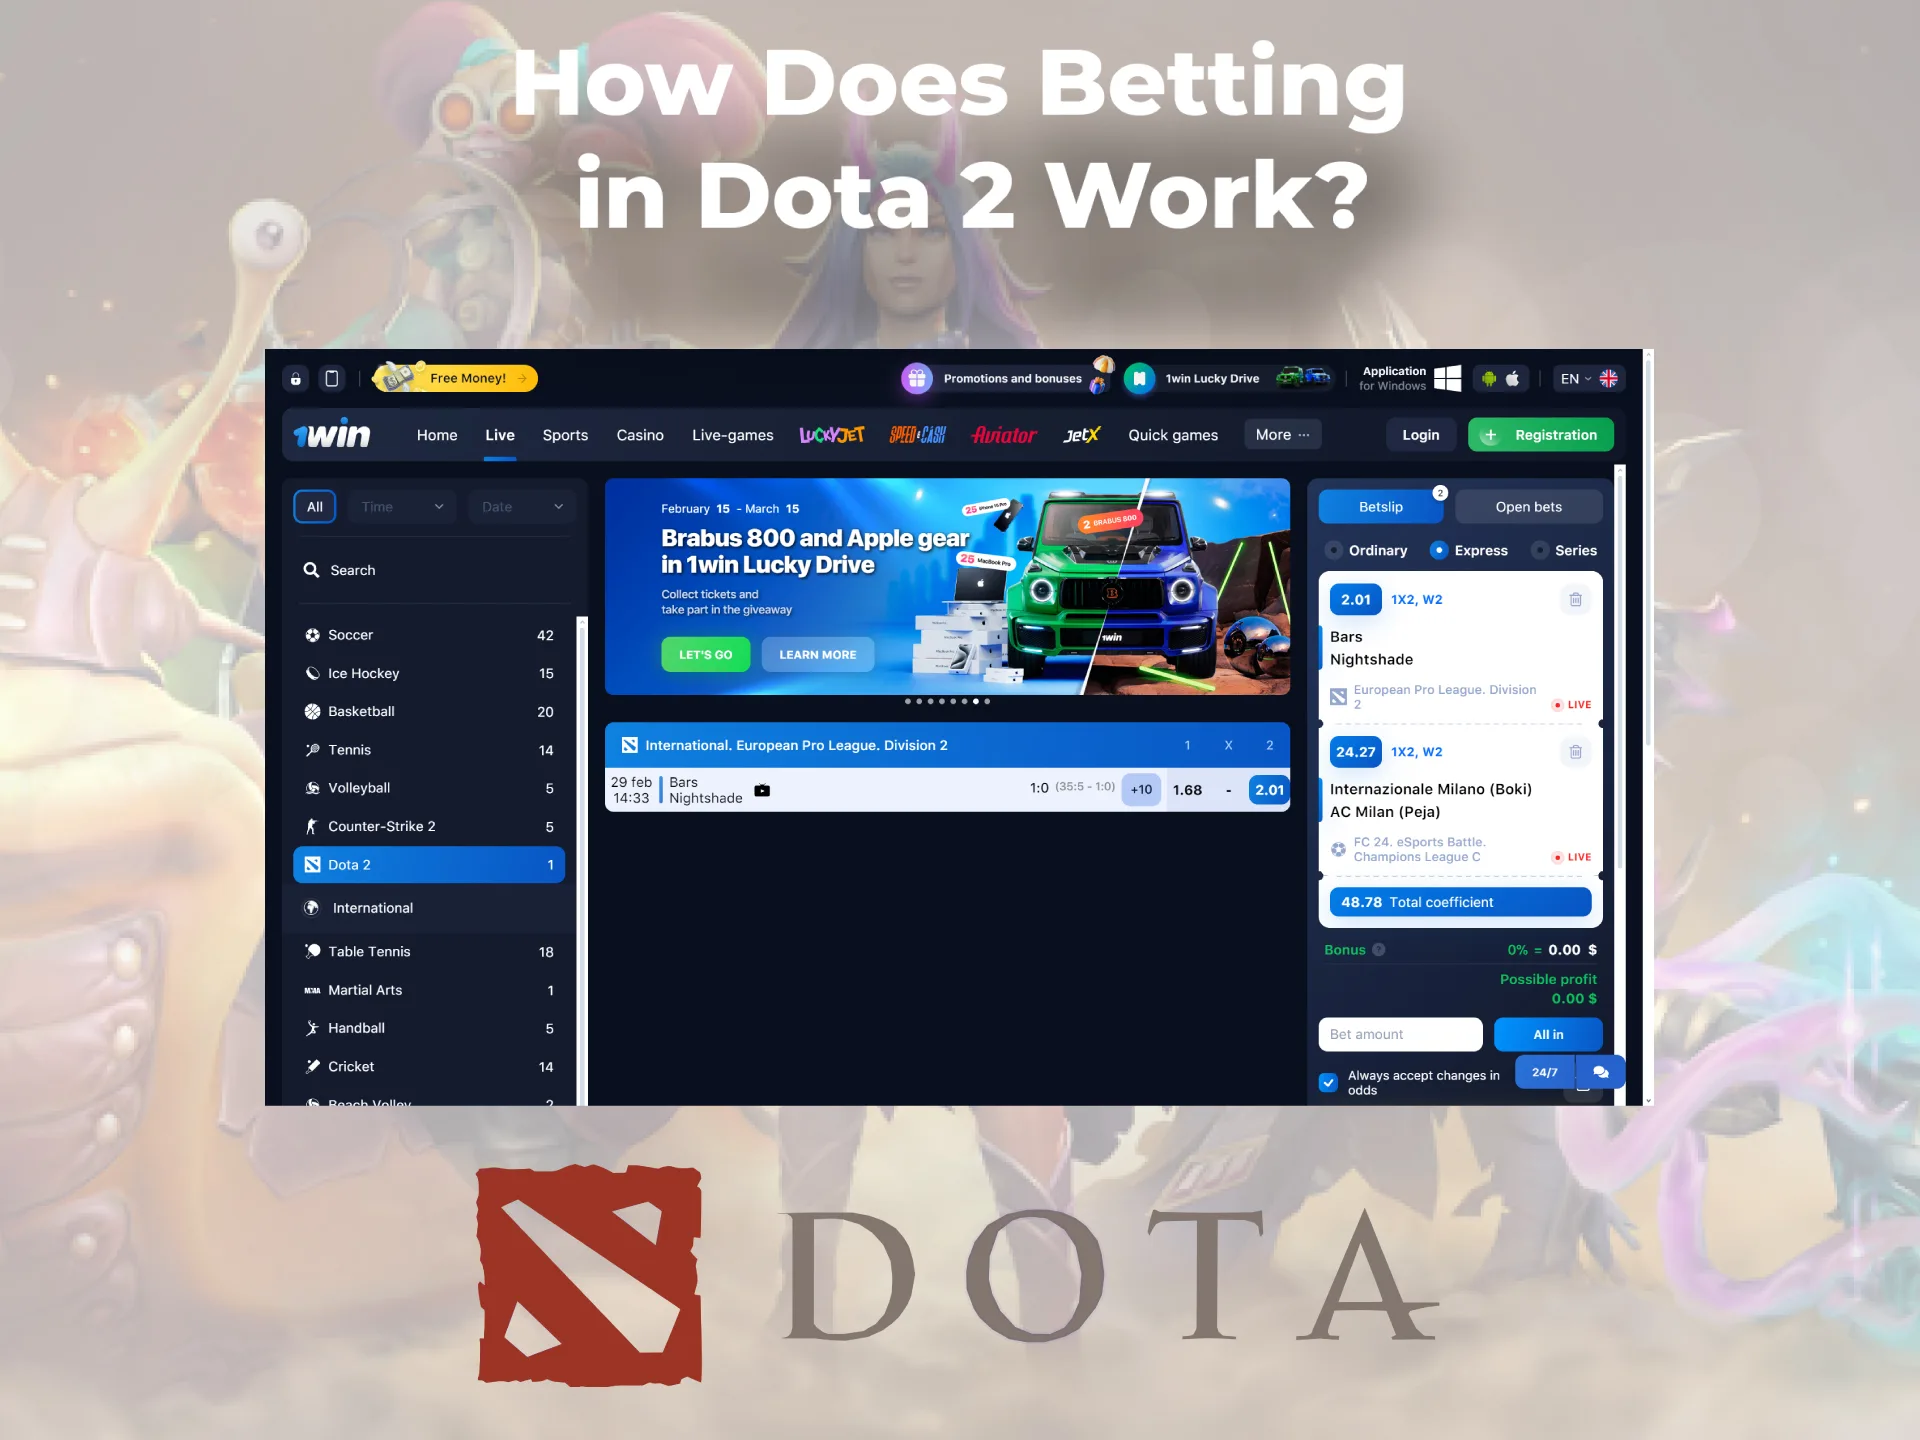 Information for professional prediction of match outcomes in Dota 2.